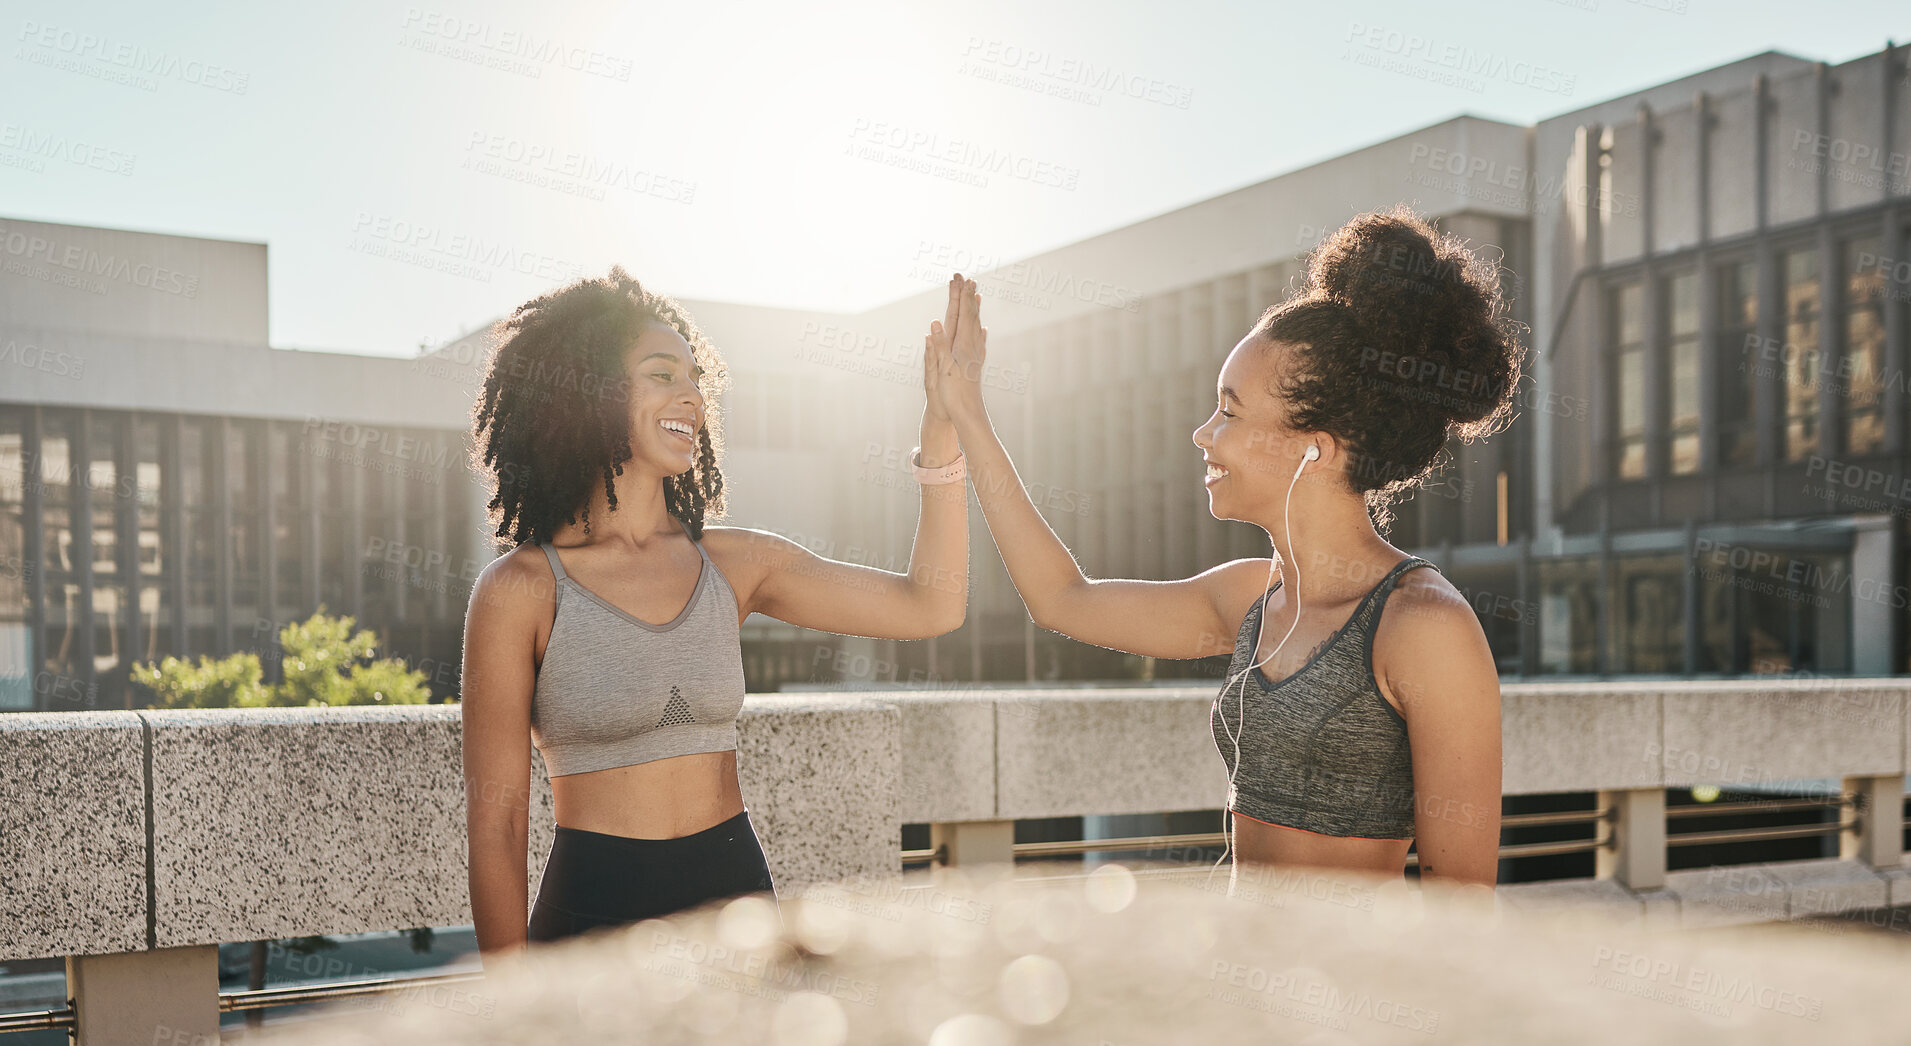 Buy stock photo Fitness, friends and high five in the city for exercise, training or workout together in the outdoors. Happy women in partnership touching hands for sports support, success or healthy cardio wellness